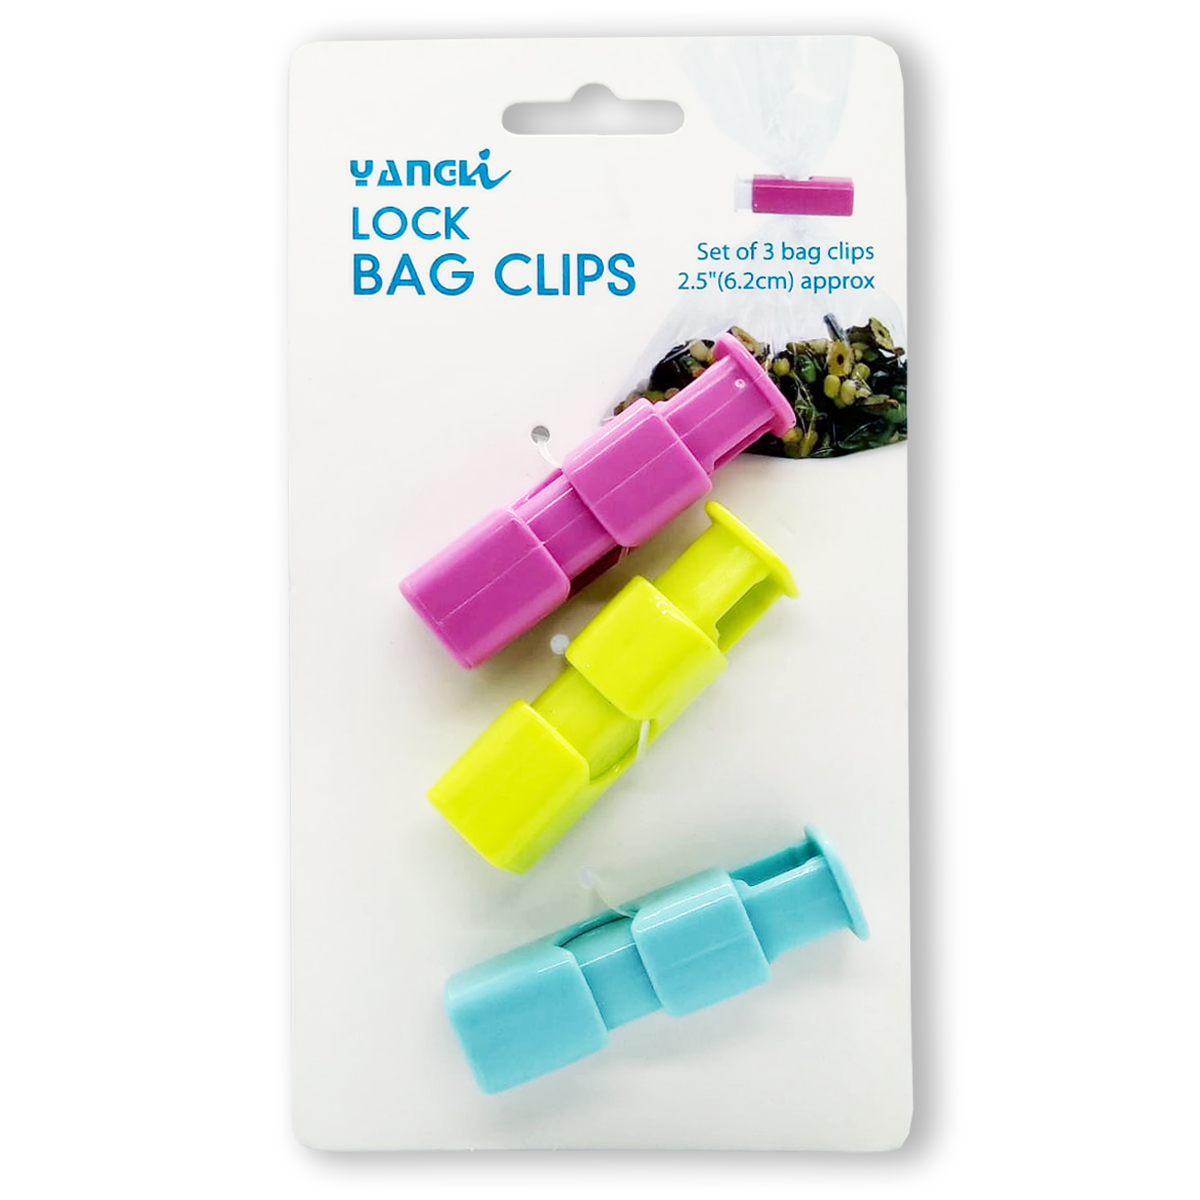 12pcs Bread Bag Clips, Bagel Bag Clips, Sealing Clip, Easy Squeeze & Lock,  For Sealing Various Bags, Home Kitchen Supplies